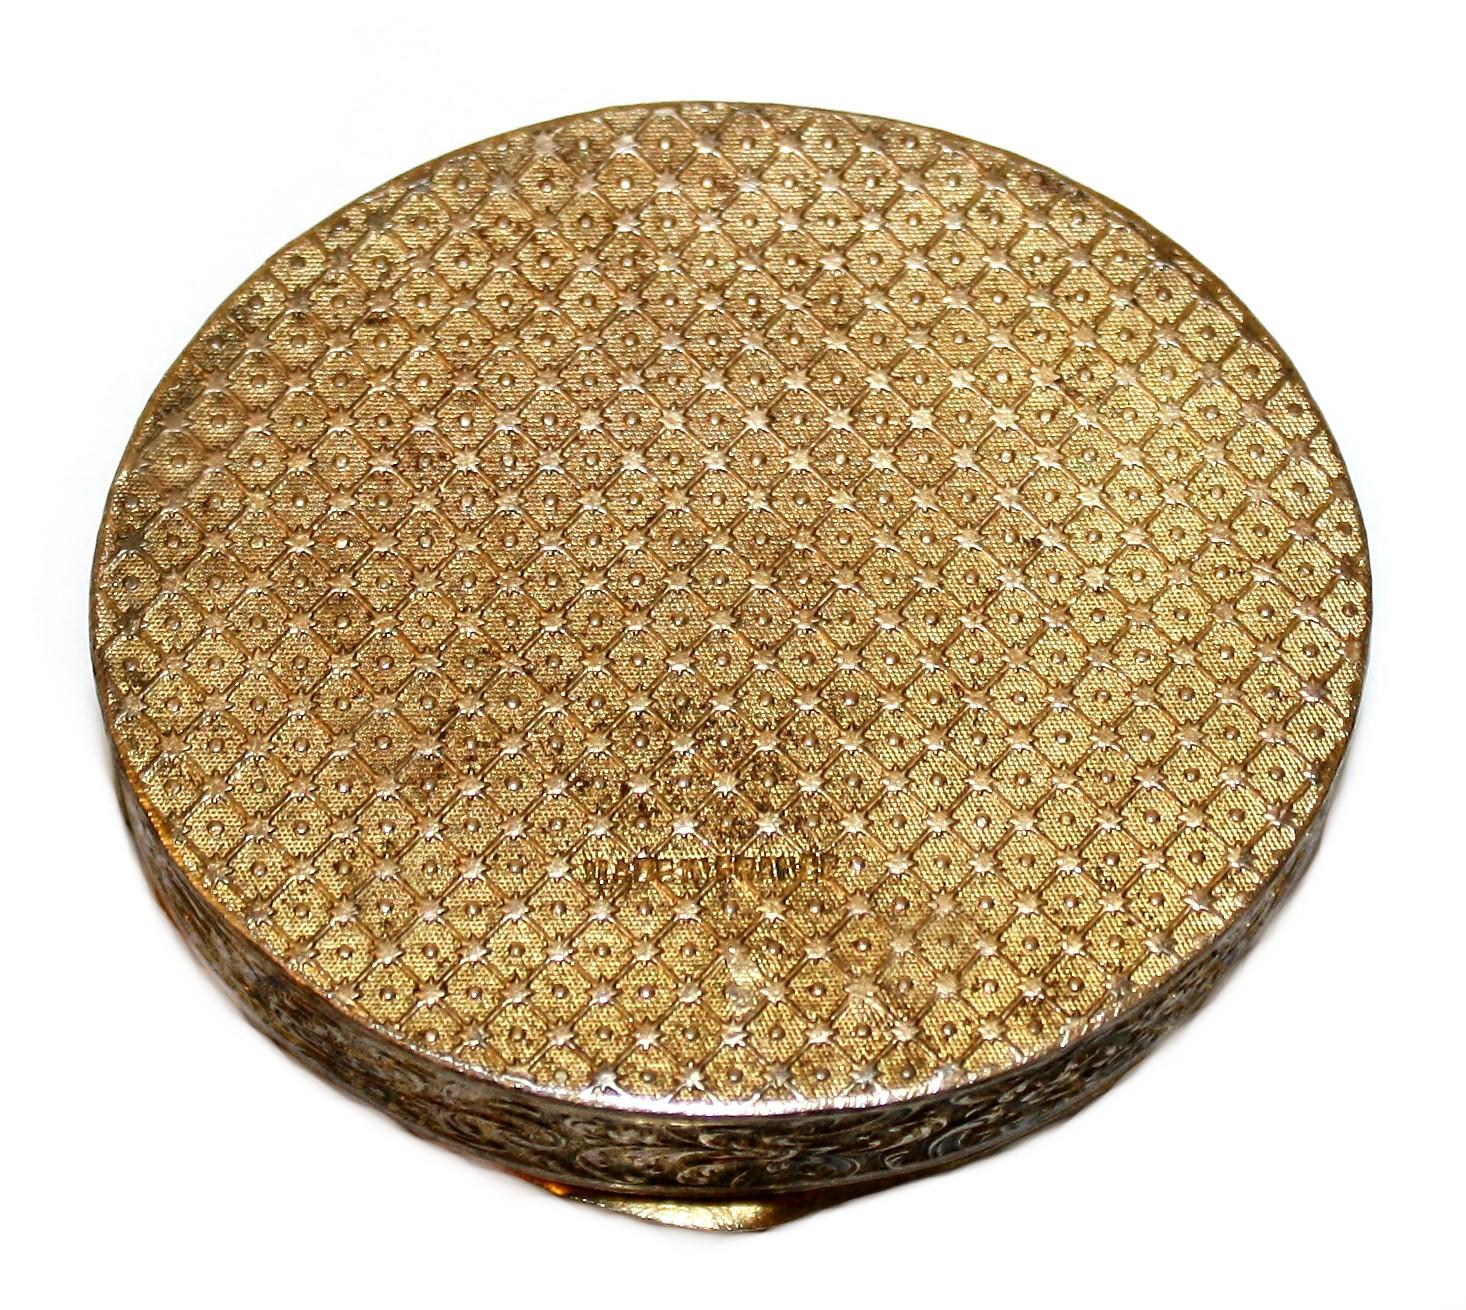 Brown Circa 1920's Art Deco Era French Enameled And Jeweled Compact  For Sale